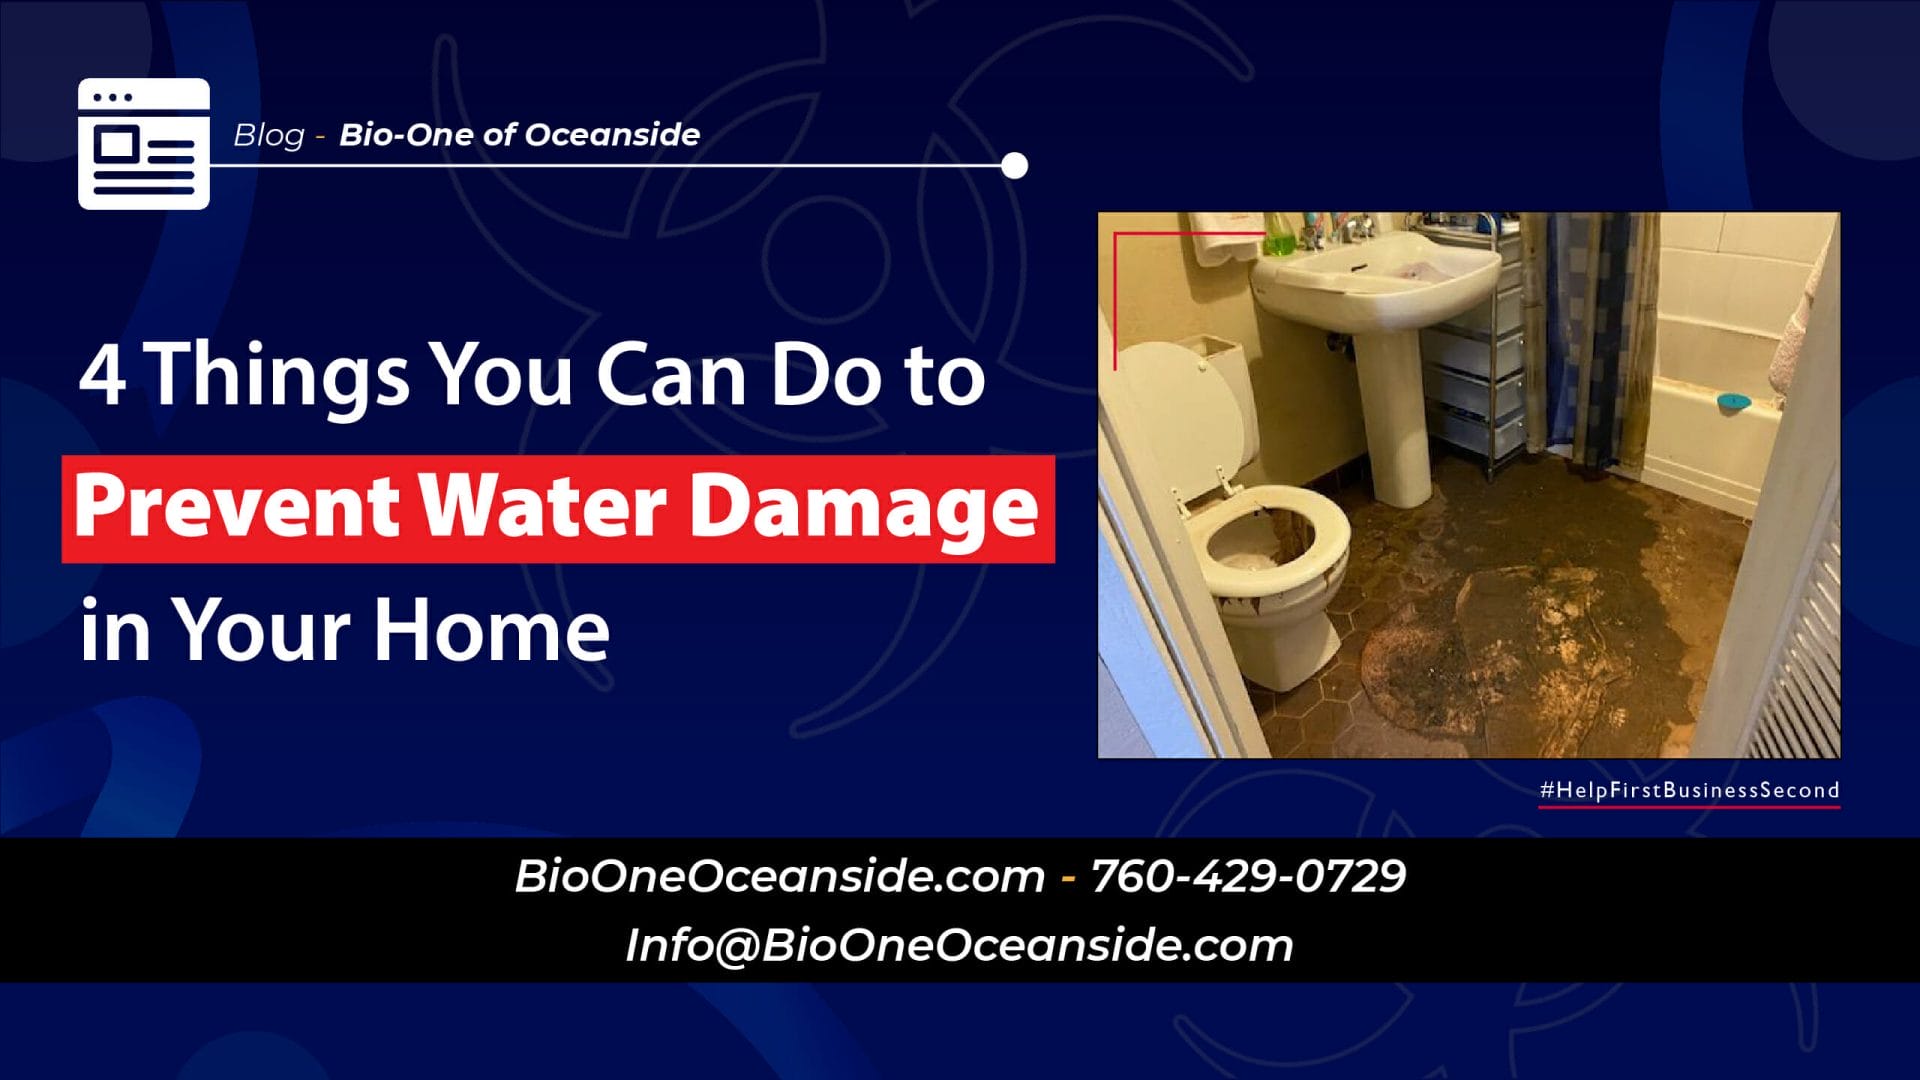 4 Things You Can Do to Prevent Water Damage in Your Home